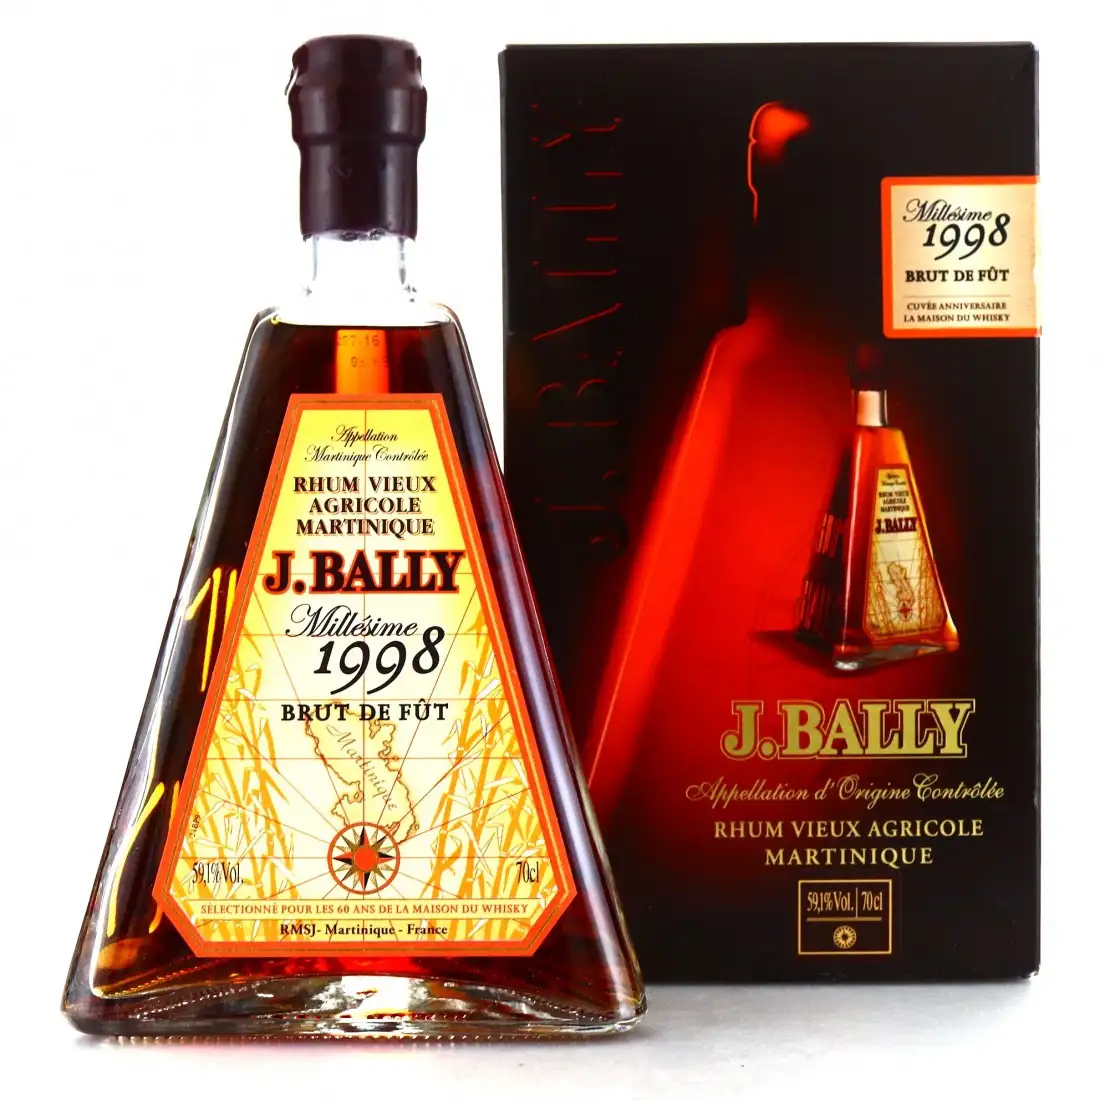 Image of the front of the bottle of the rum J. Bally Millésime 1998